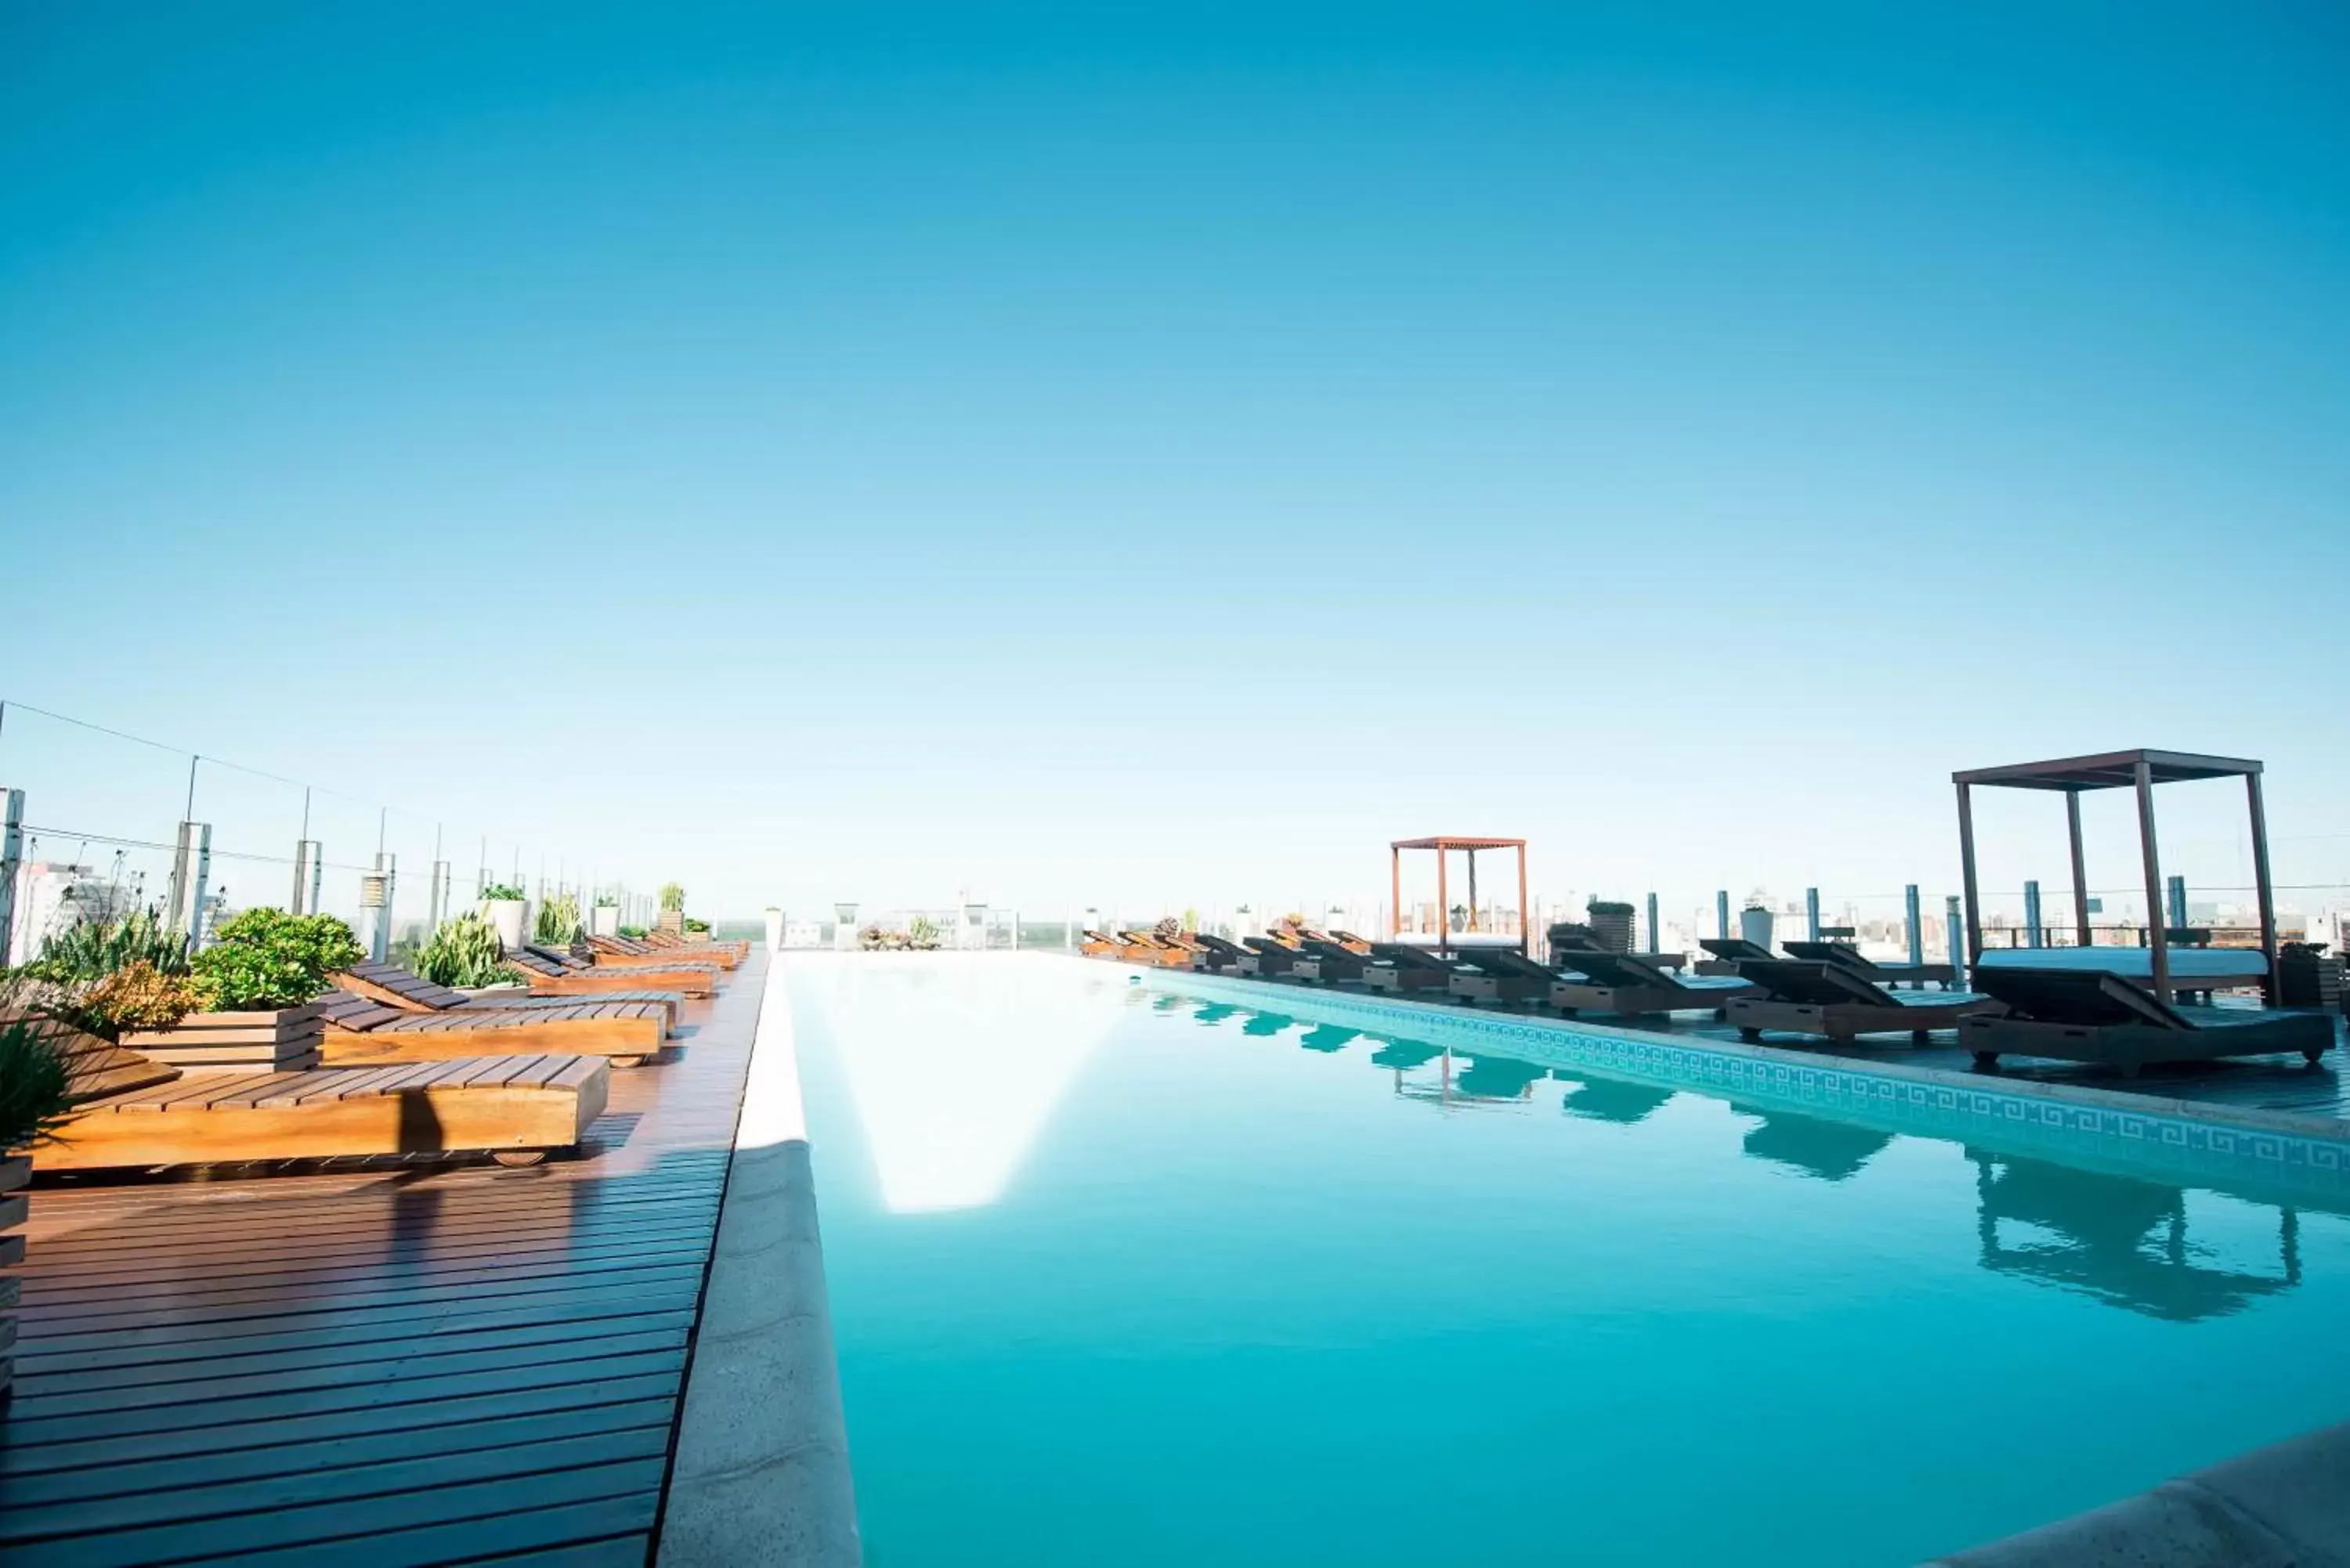 Off site, Swimming Pool in Los Silos Hotel